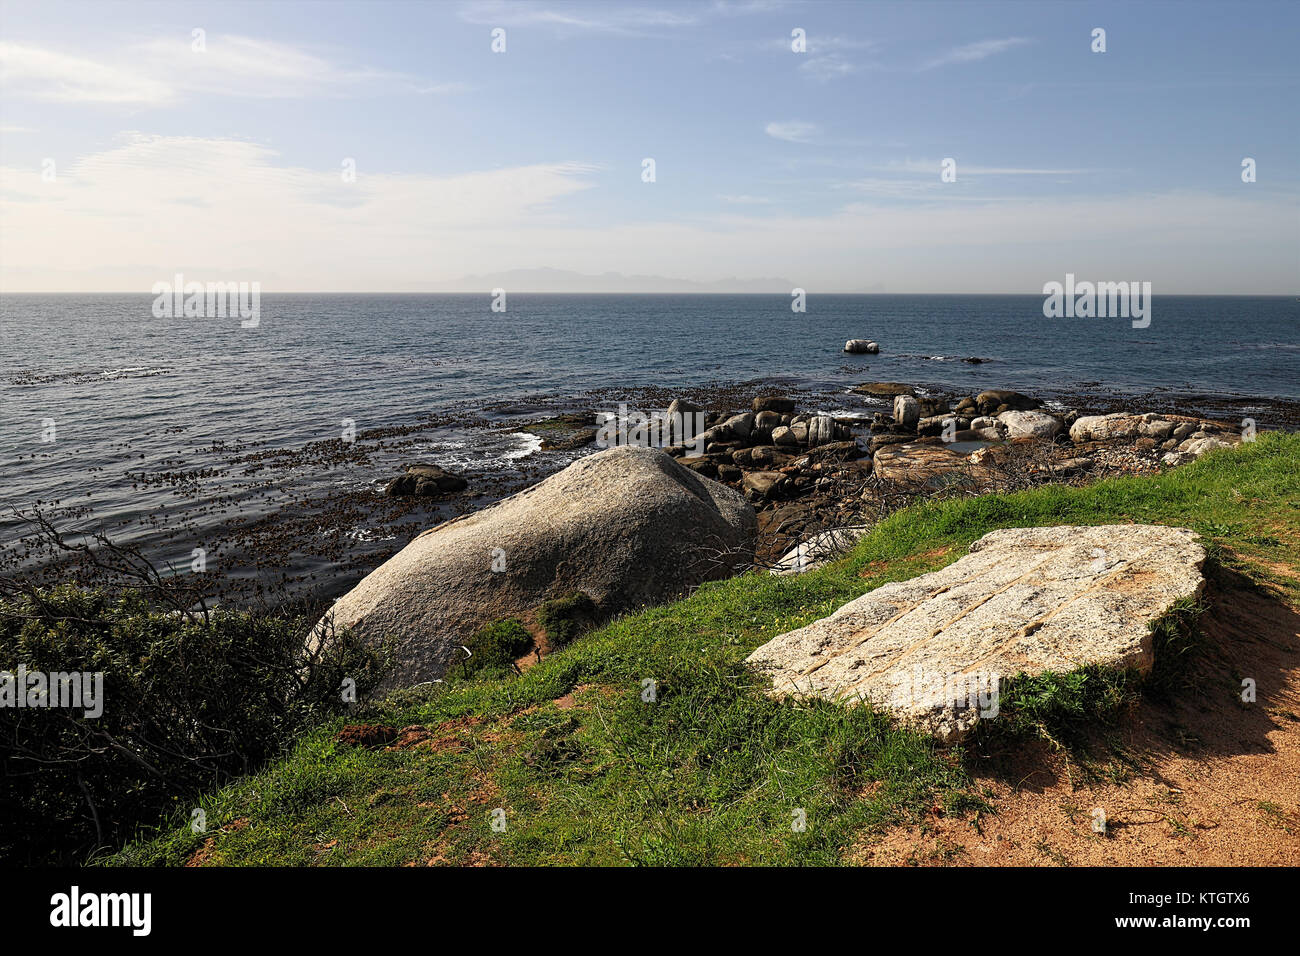 Landscape near the coast at Cape of Good Hope, South Africa Stock Photo